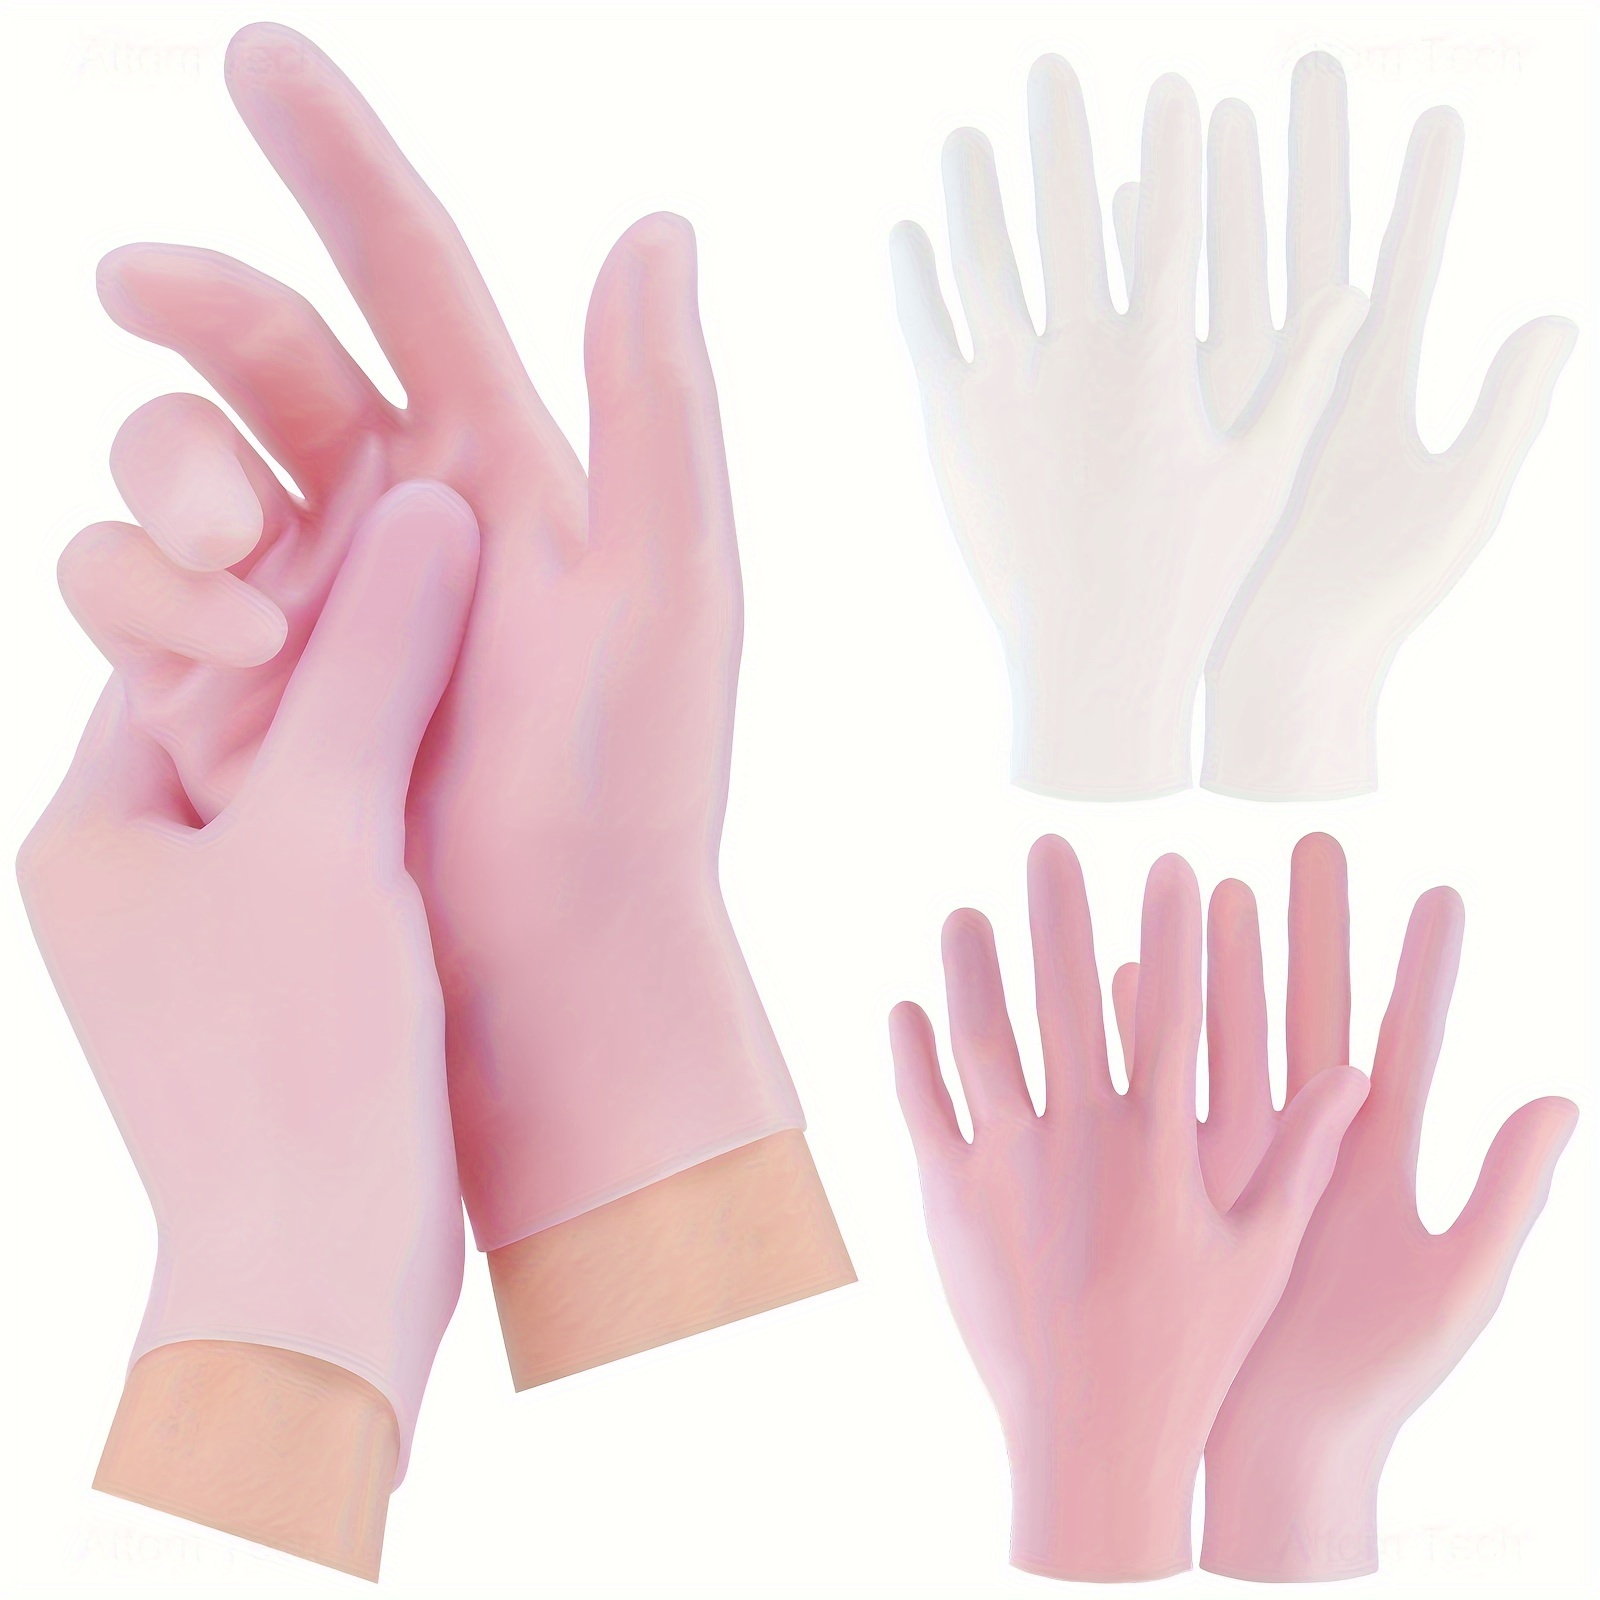 

1 Pairs Silicone Moisturizing Gloves, Silicone Gloves For Dry Hands, Gel Spa Hydrating Gloves, Universal Fit For Men & Women, Spa-like Hydrating Skin Care At Home